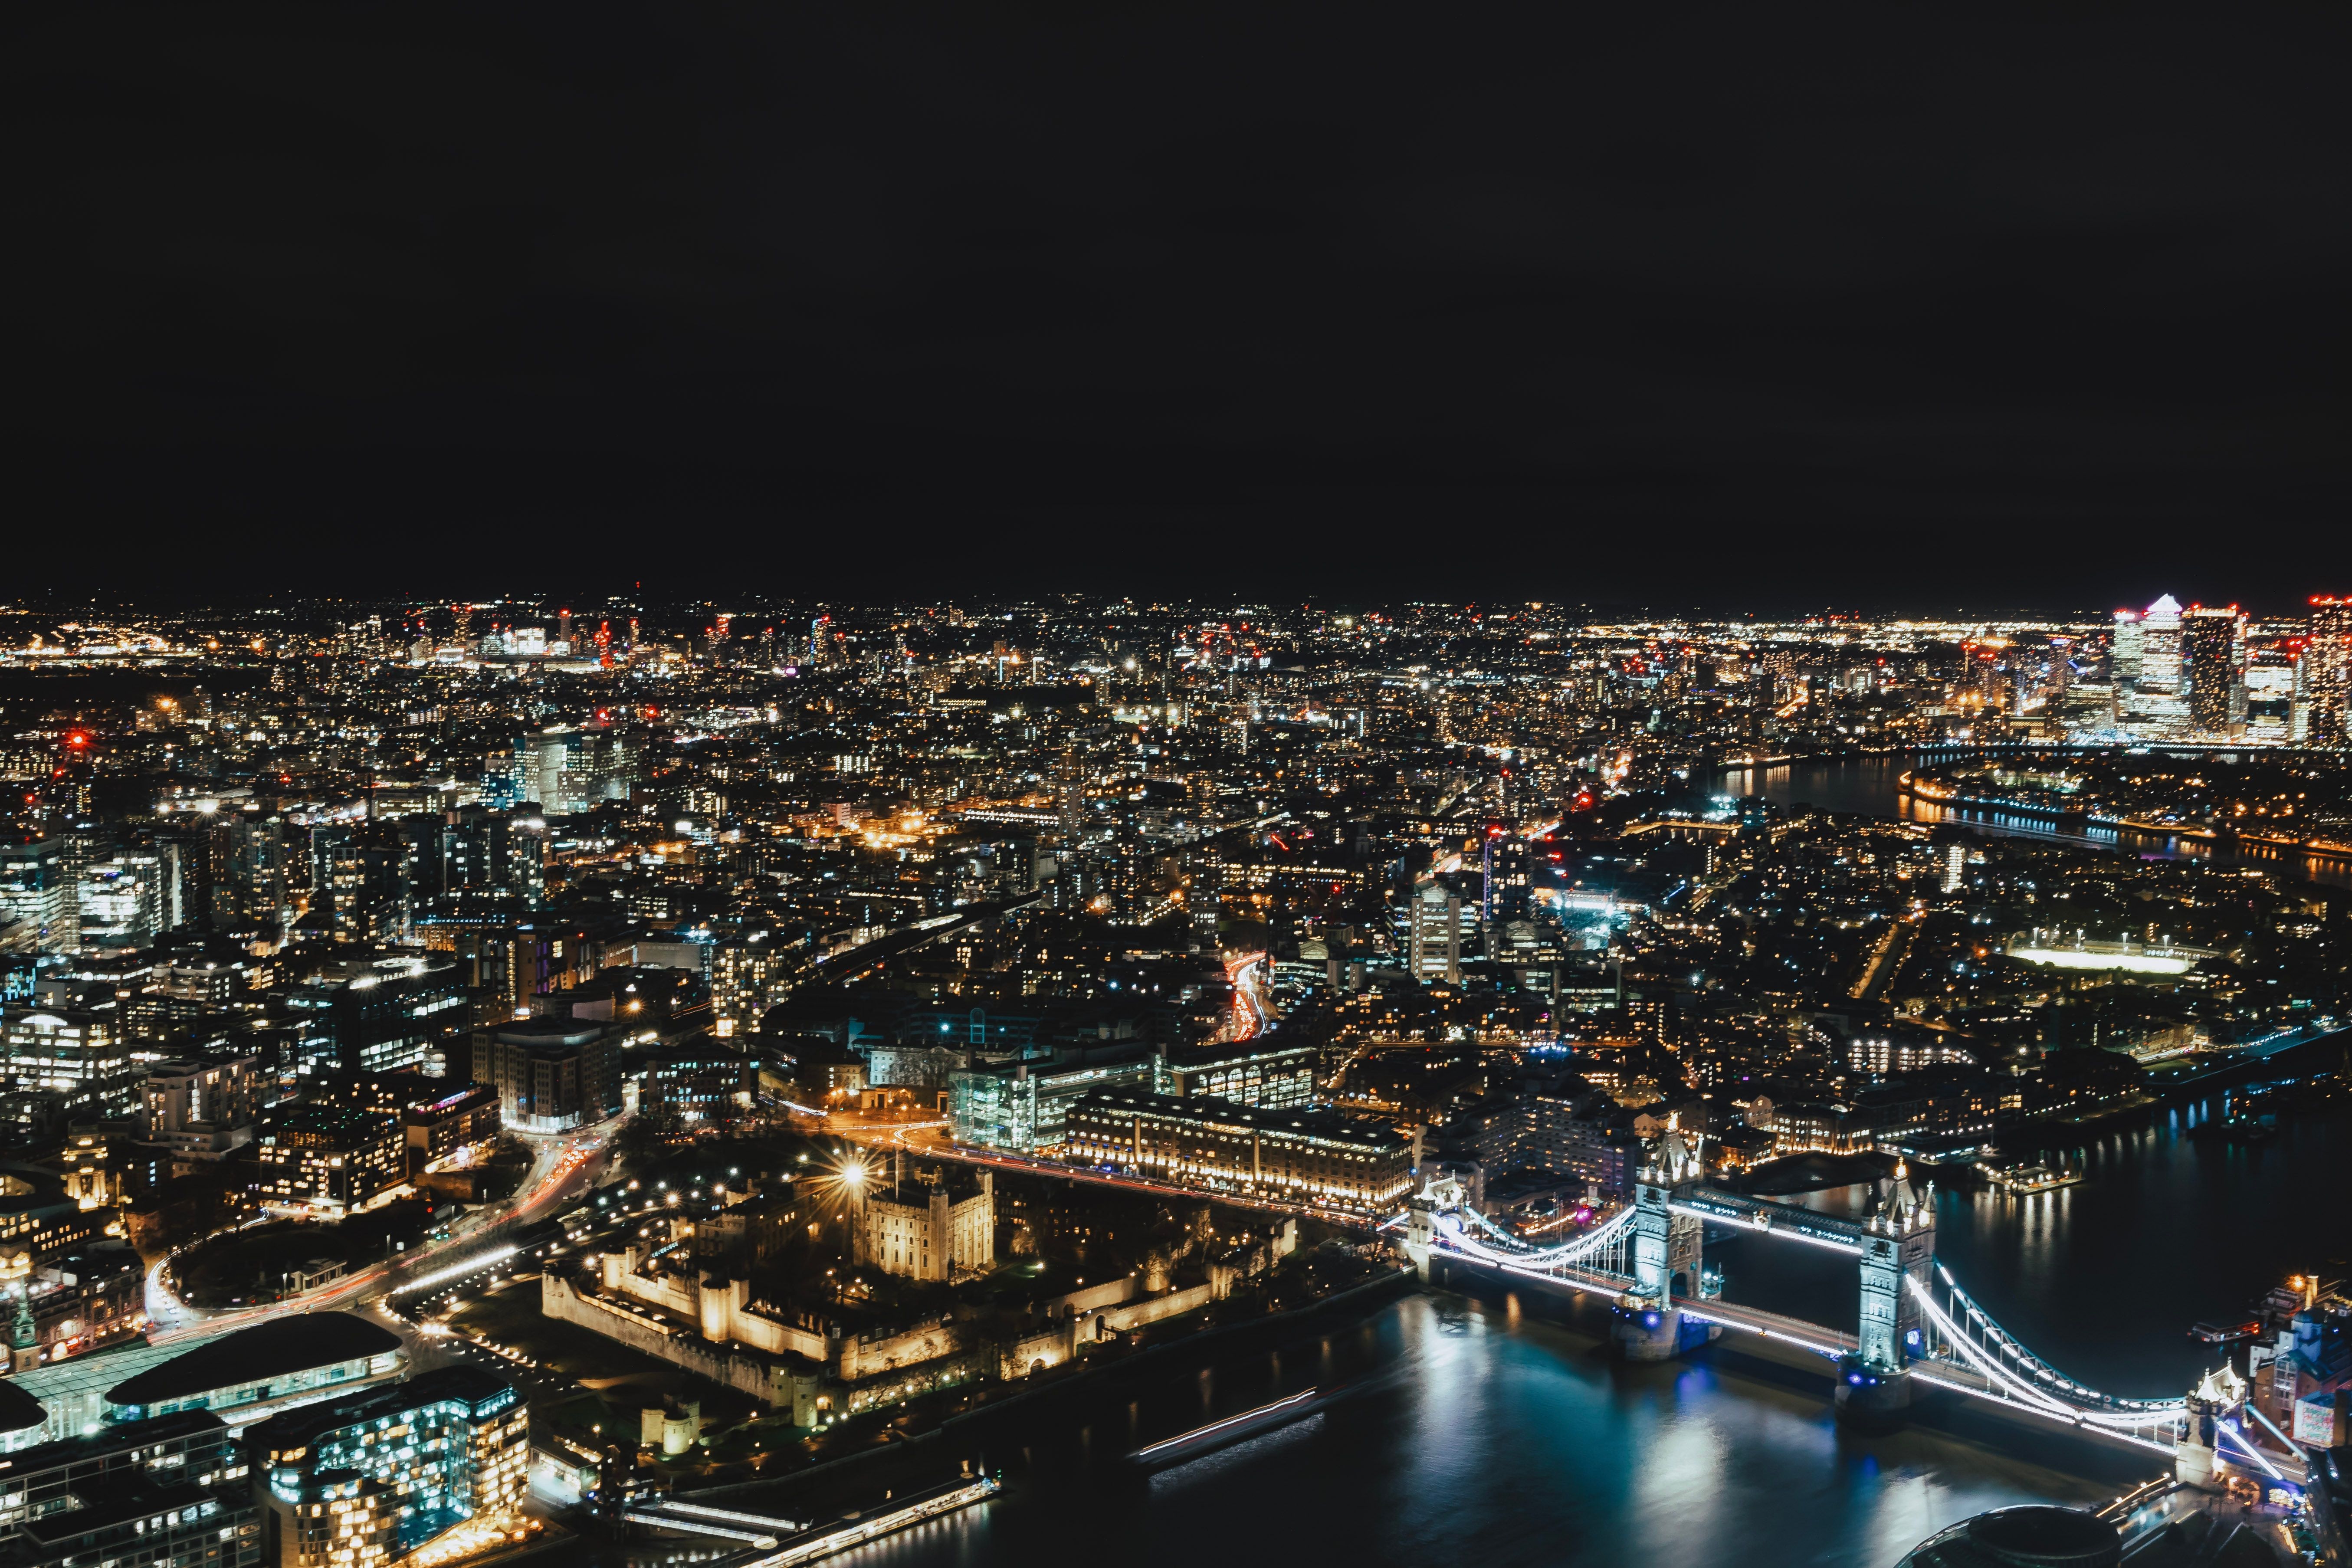 An aerial view of London at night with famous landmarks like the London Bridge, UK